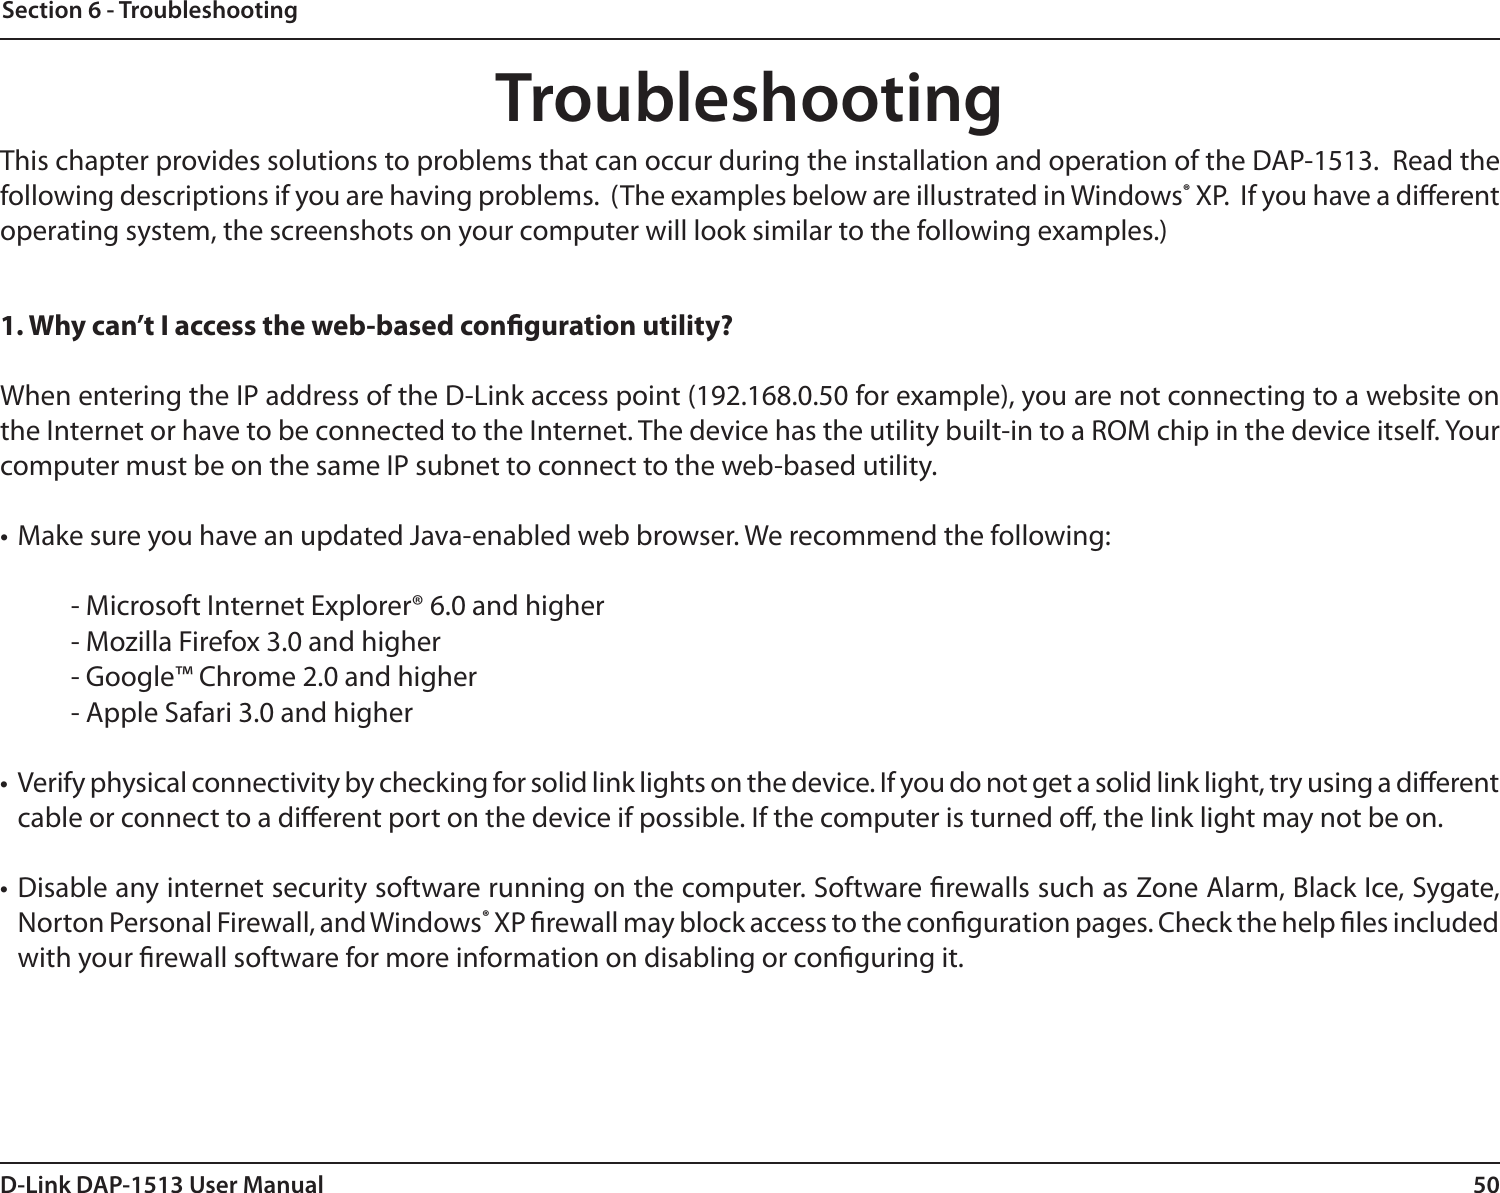 50D-Link DAP-1513 User ManualSection 6 - TroubleshootingTroubleshootingThis chapter provides solutions to problems that can occur during the installation and operation of the DAP-1513.  Read the following descriptions if you are having problems.  (The examples below are illustrated in Windows® XP.  If you have a dierent operating system, the screenshots on your computer will look similar to the following examples.)1. Why can’t I access the web-based conguration utility?When entering the IP address of the D-Link access point (192.168.0.50 for example), you are not connecting to a website on the Internet or have to be connected to the Internet. The device has the utility built-in to a ROM chip in the device itself. Your computer must be on the same IP subnet to connect to the web-based utility. • Make sure you have an updated Java-enabled web browser. We recommend the following: - Microsoft Internet Explorer® 6.0 and higher- Mozilla Firefox 3.0 and higher- Google™ Chrome 2.0 and higher- Apple Safari 3.0 and higher• Verify physical connectivity by checking for solid link lights on the device. If you do not get a solid link light, try using a dierent cable or connect to a dierent port on the device if possible. If the computer is turned o, the link light may not be on.• Disable any internet security software running on the computer. Software rewalls such as Zone Alarm, Black Ice, Sygate, Norton Personal Firewall, and Windows® XP rewall may block access to the conguration pages. Check the help les included with your rewall software for more information on disabling or conguring it.